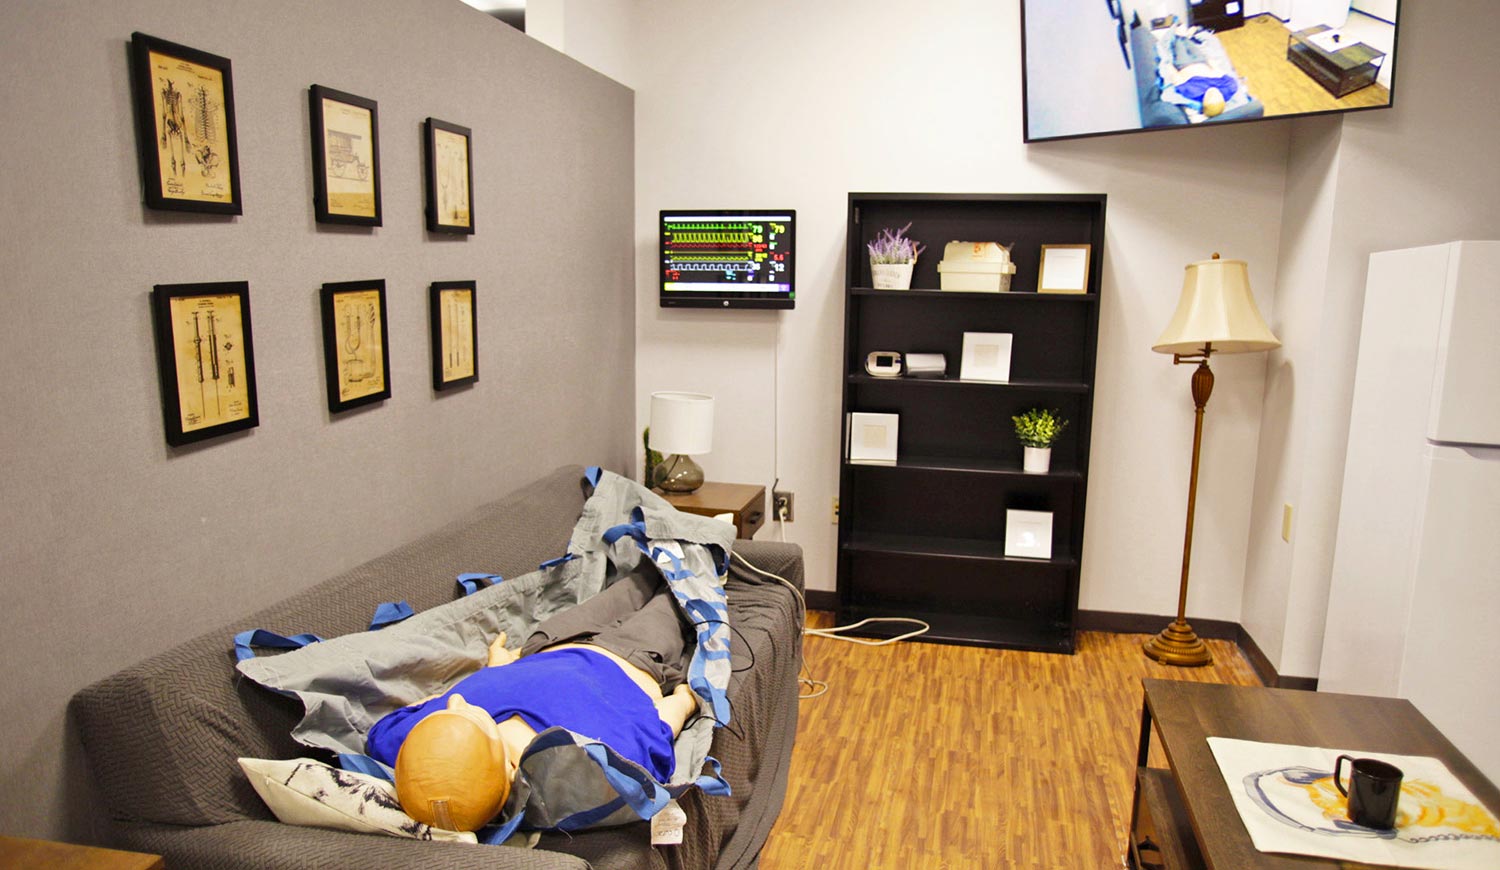 High fidelity medical mannequin lies supine on a sofa in the living room of the Emergency Medical Services simulation suite. The mannequin’s medical symptoms are controlled by instructors in an adjacent control room. Vital signs are displayed on the computer monitor on the far wall and images captured by a PTZ camera in the room appear on the 55” flat panel display in the upper corner of the far wall.